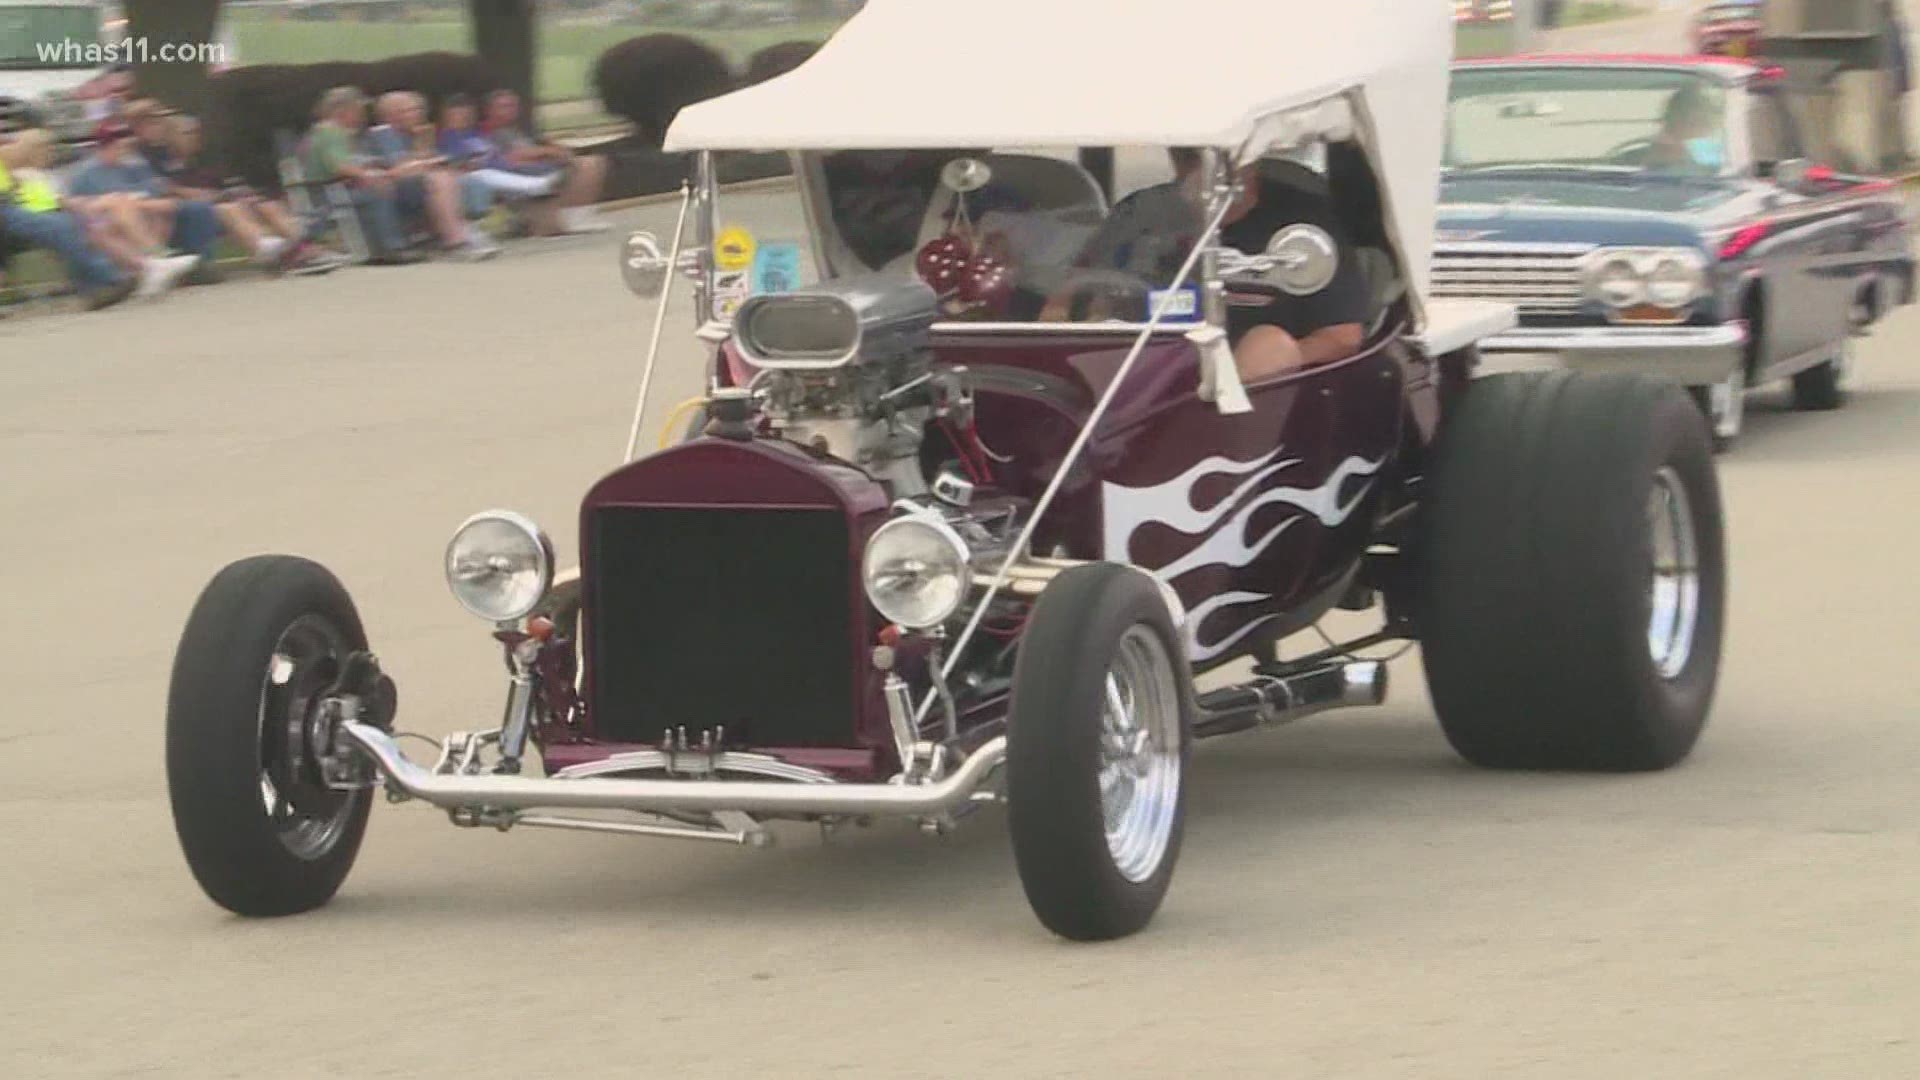 The huge gathering with cars from the 50's, 60's and 70's usually brings about 12,000 vehicles, but this year organizers are expecting to see about 7,000.